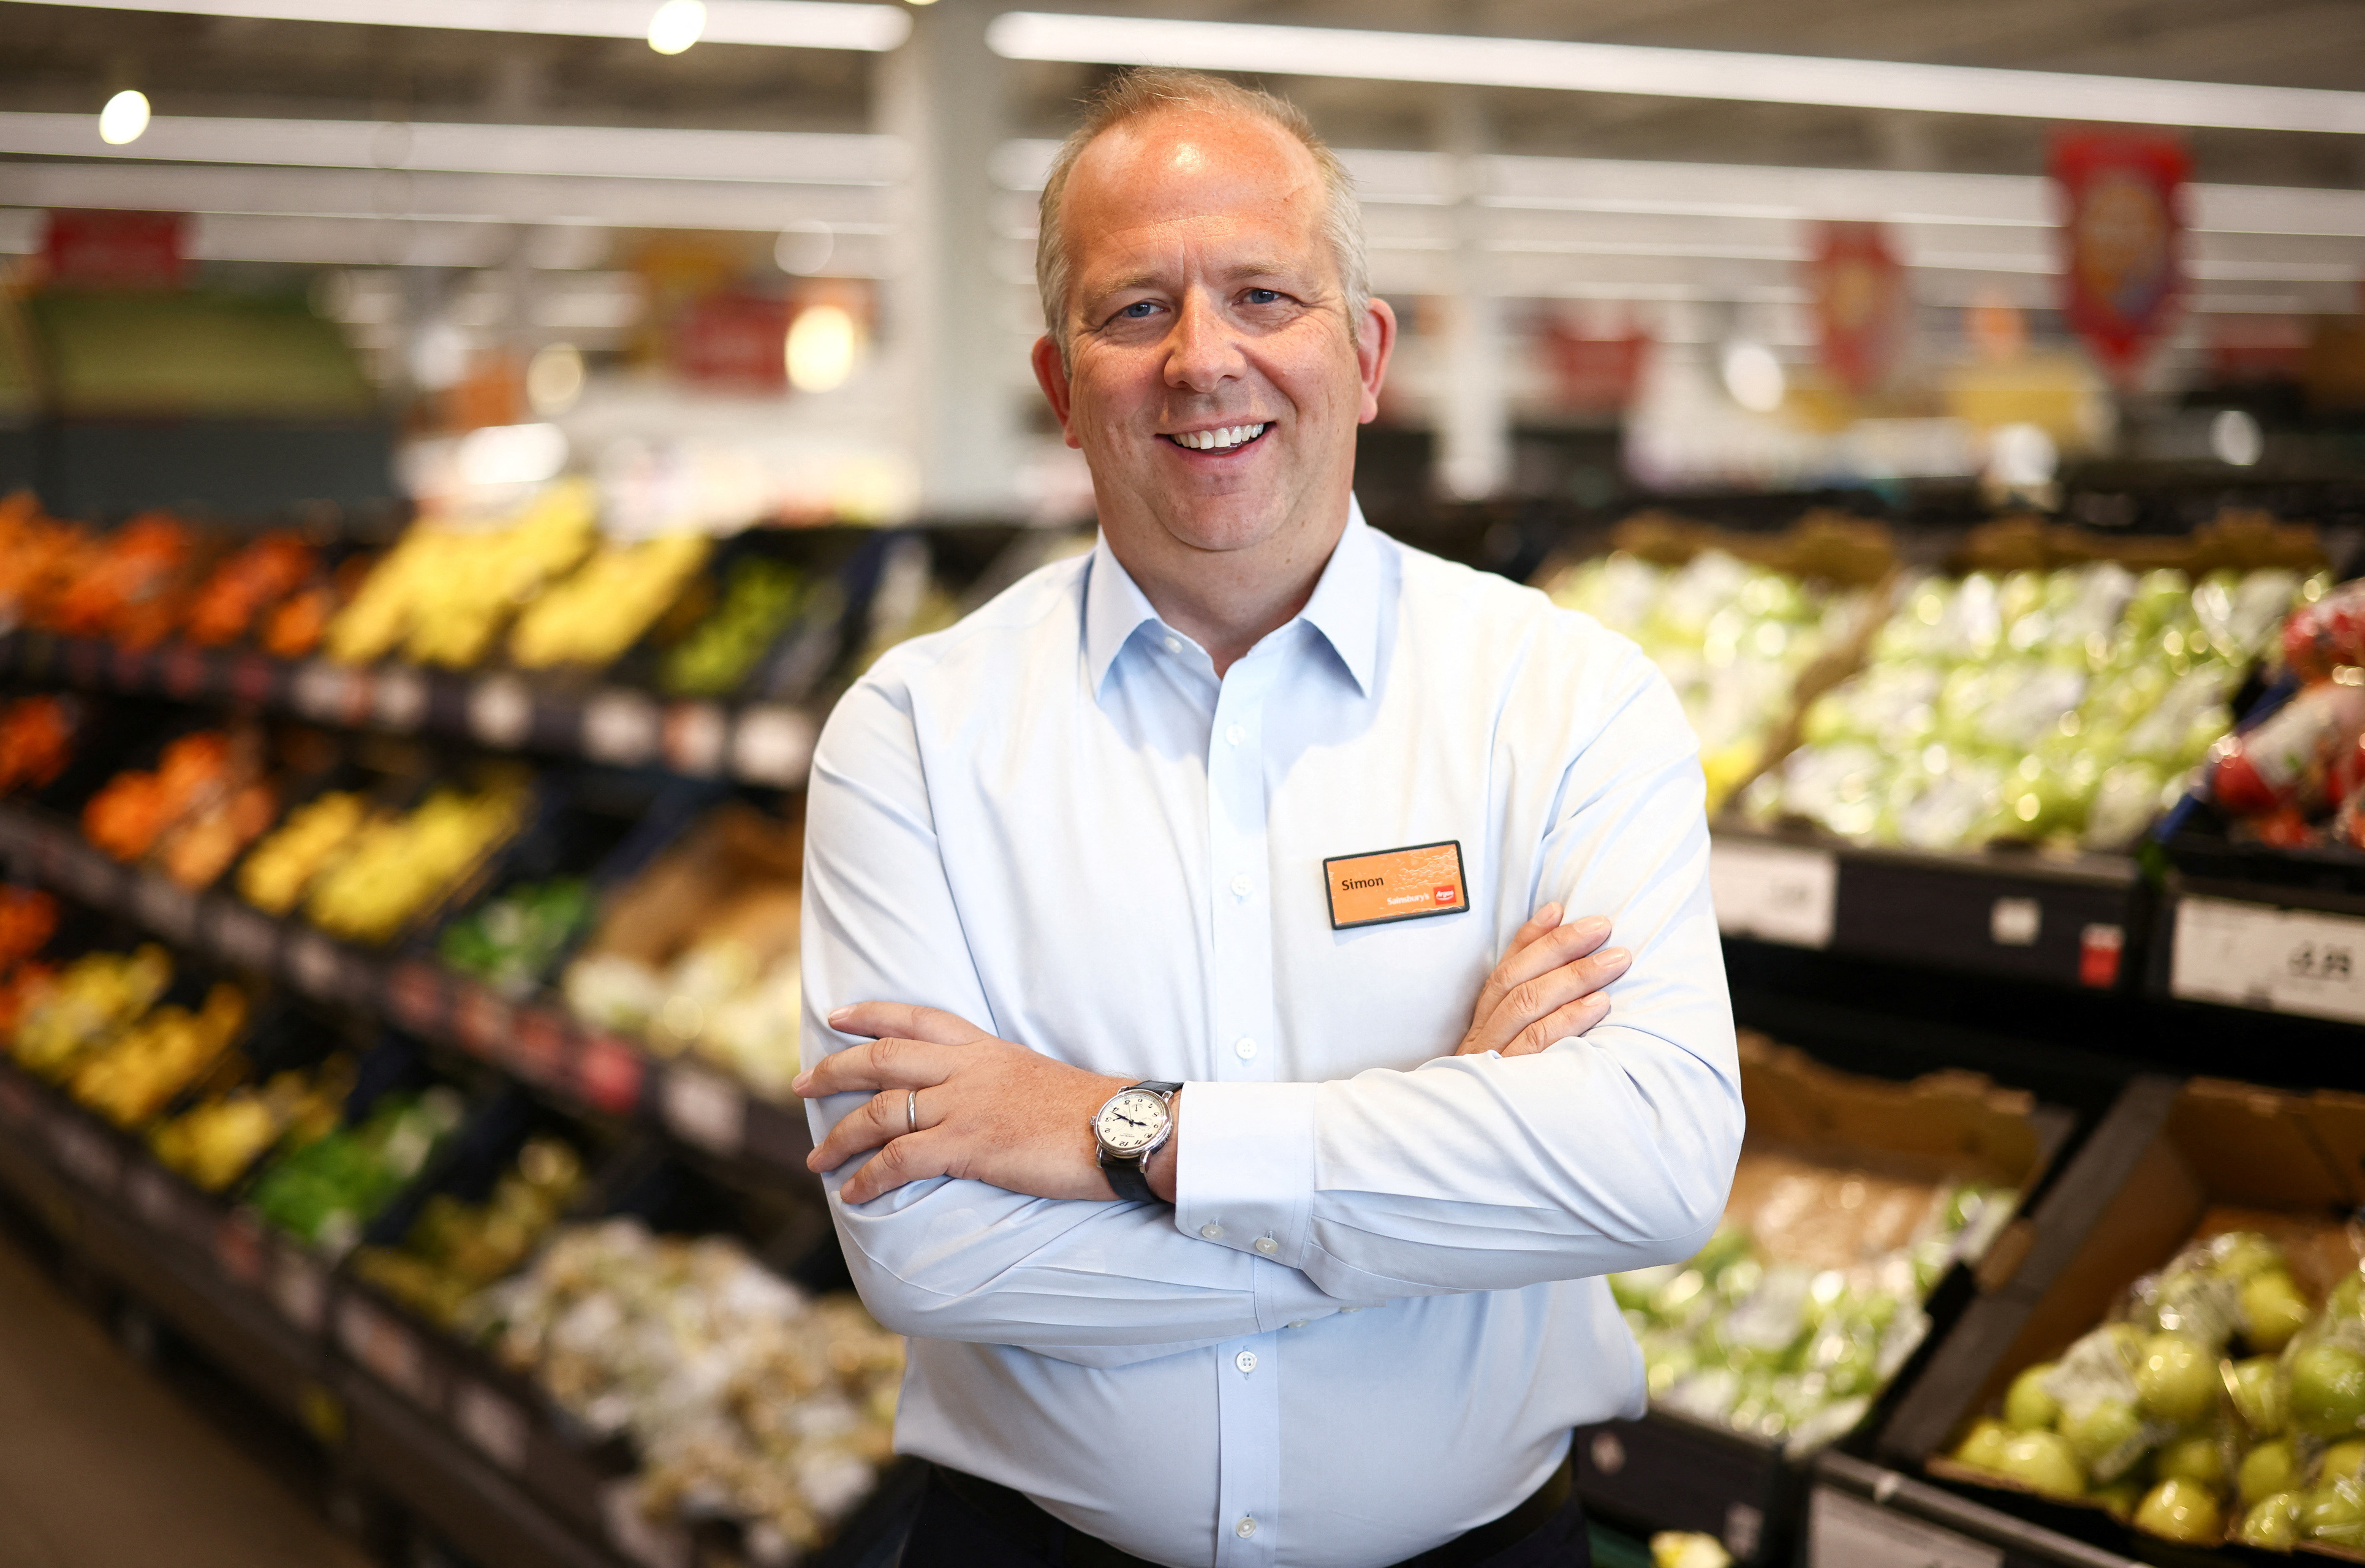 Chief Executive Officer of Sainsbury's Simon Roberts poses inside a Sainsbury’s  supermarket in Richmond, west London